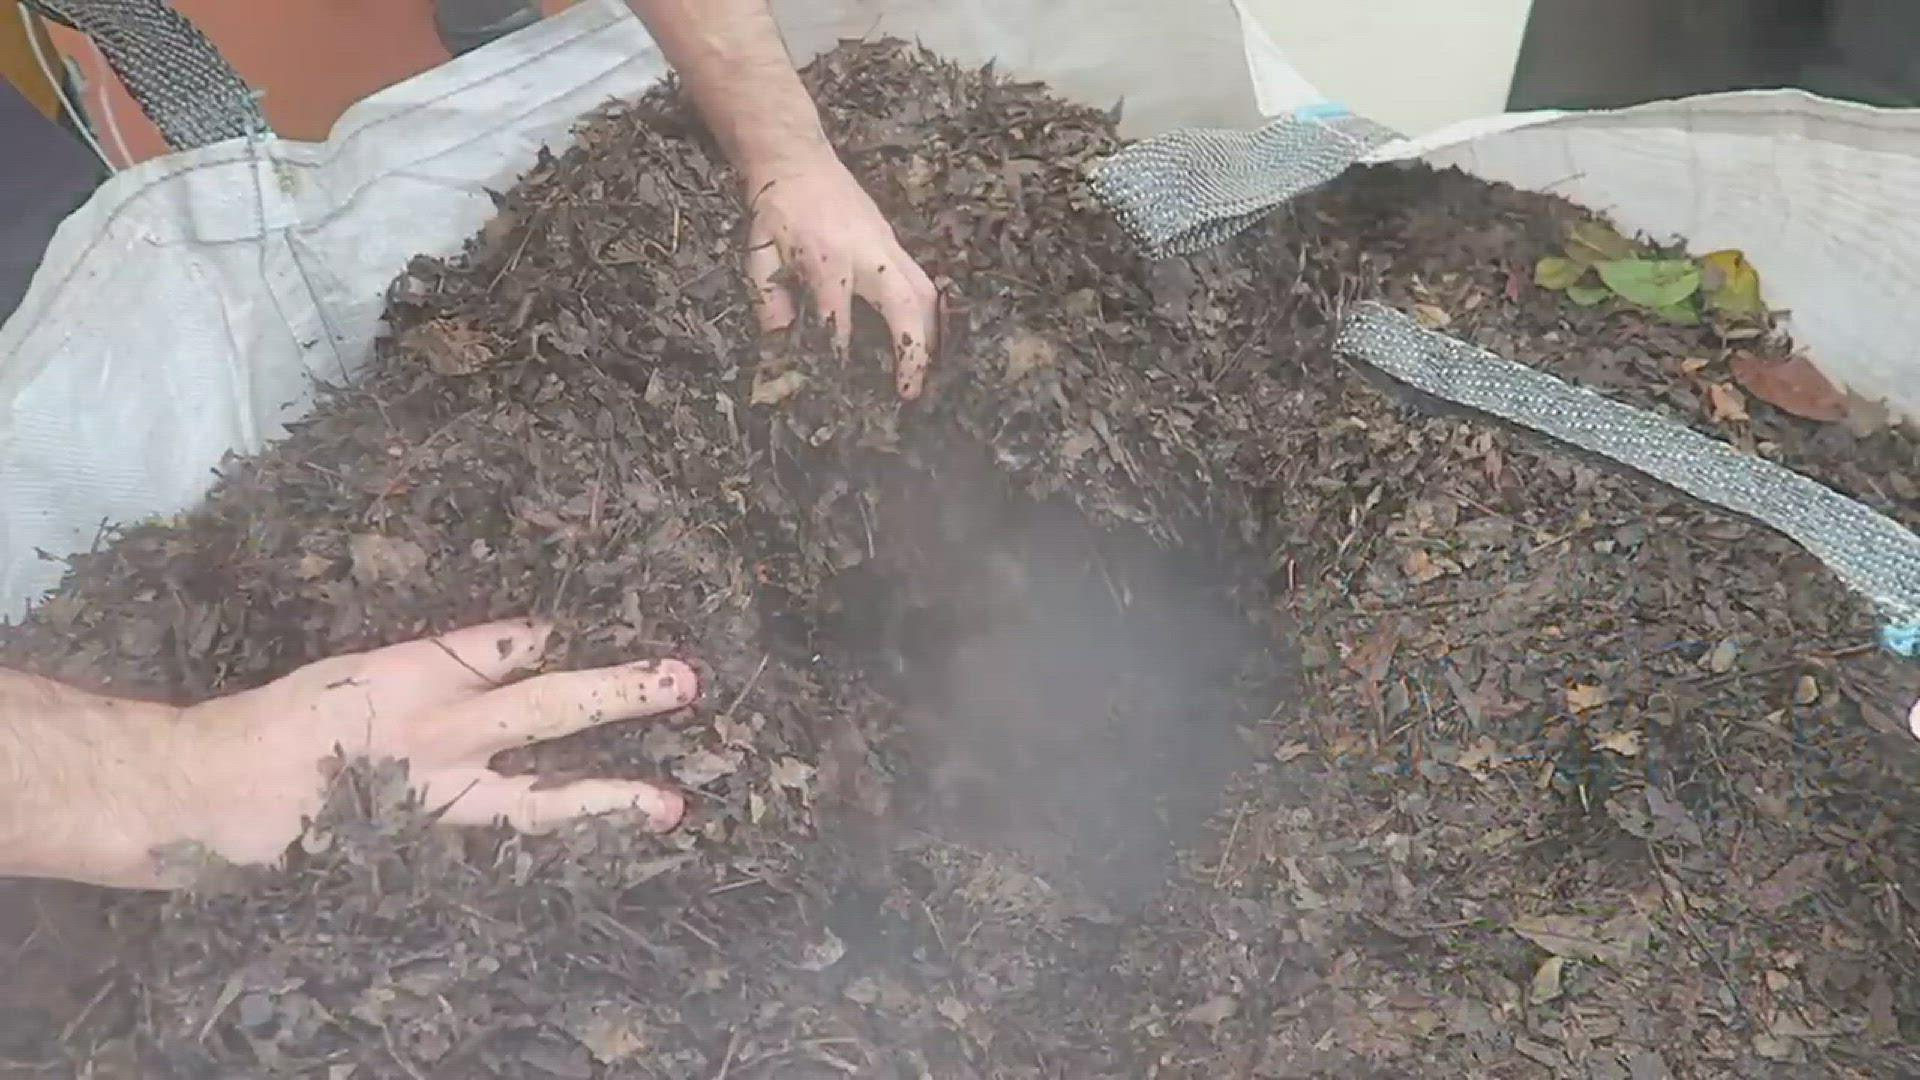 'Video thumbnail for How To Make Compost - Composting Process  - Compost Methods'